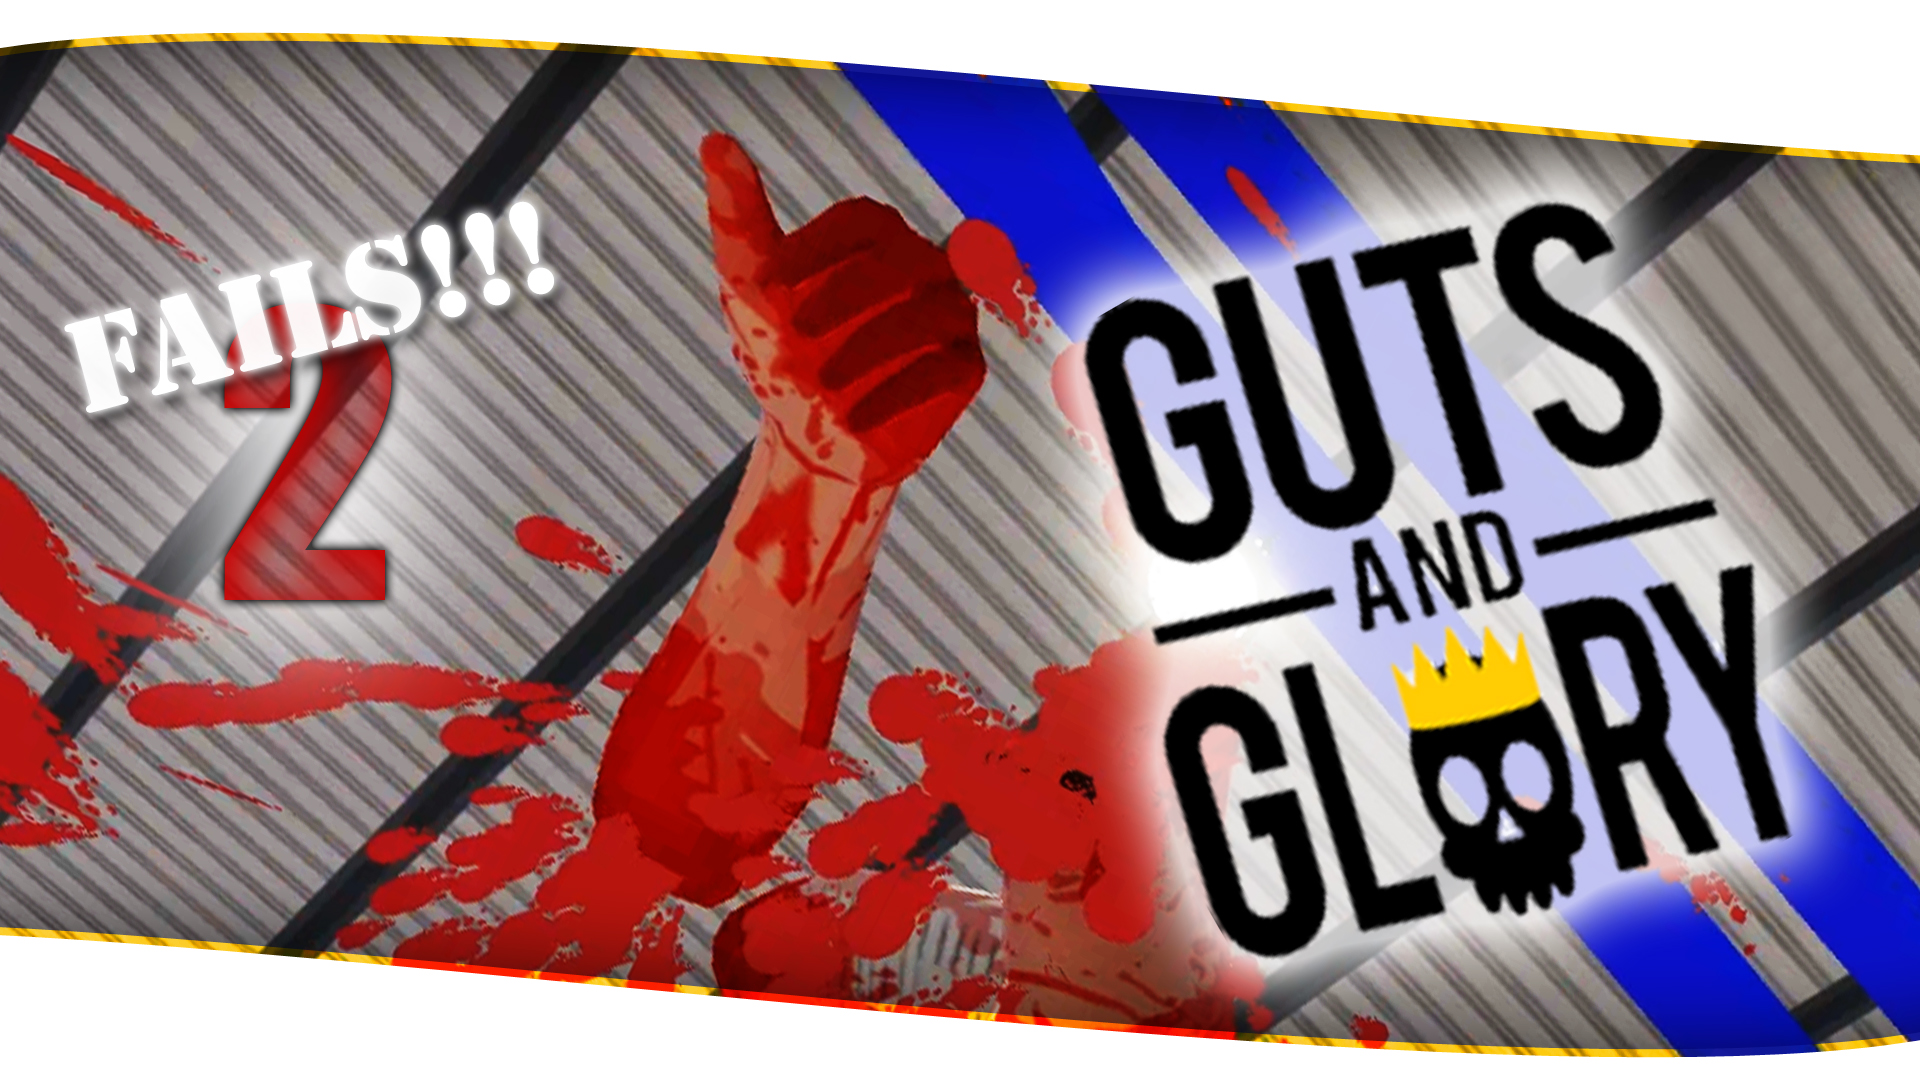 guts and glory unblocked